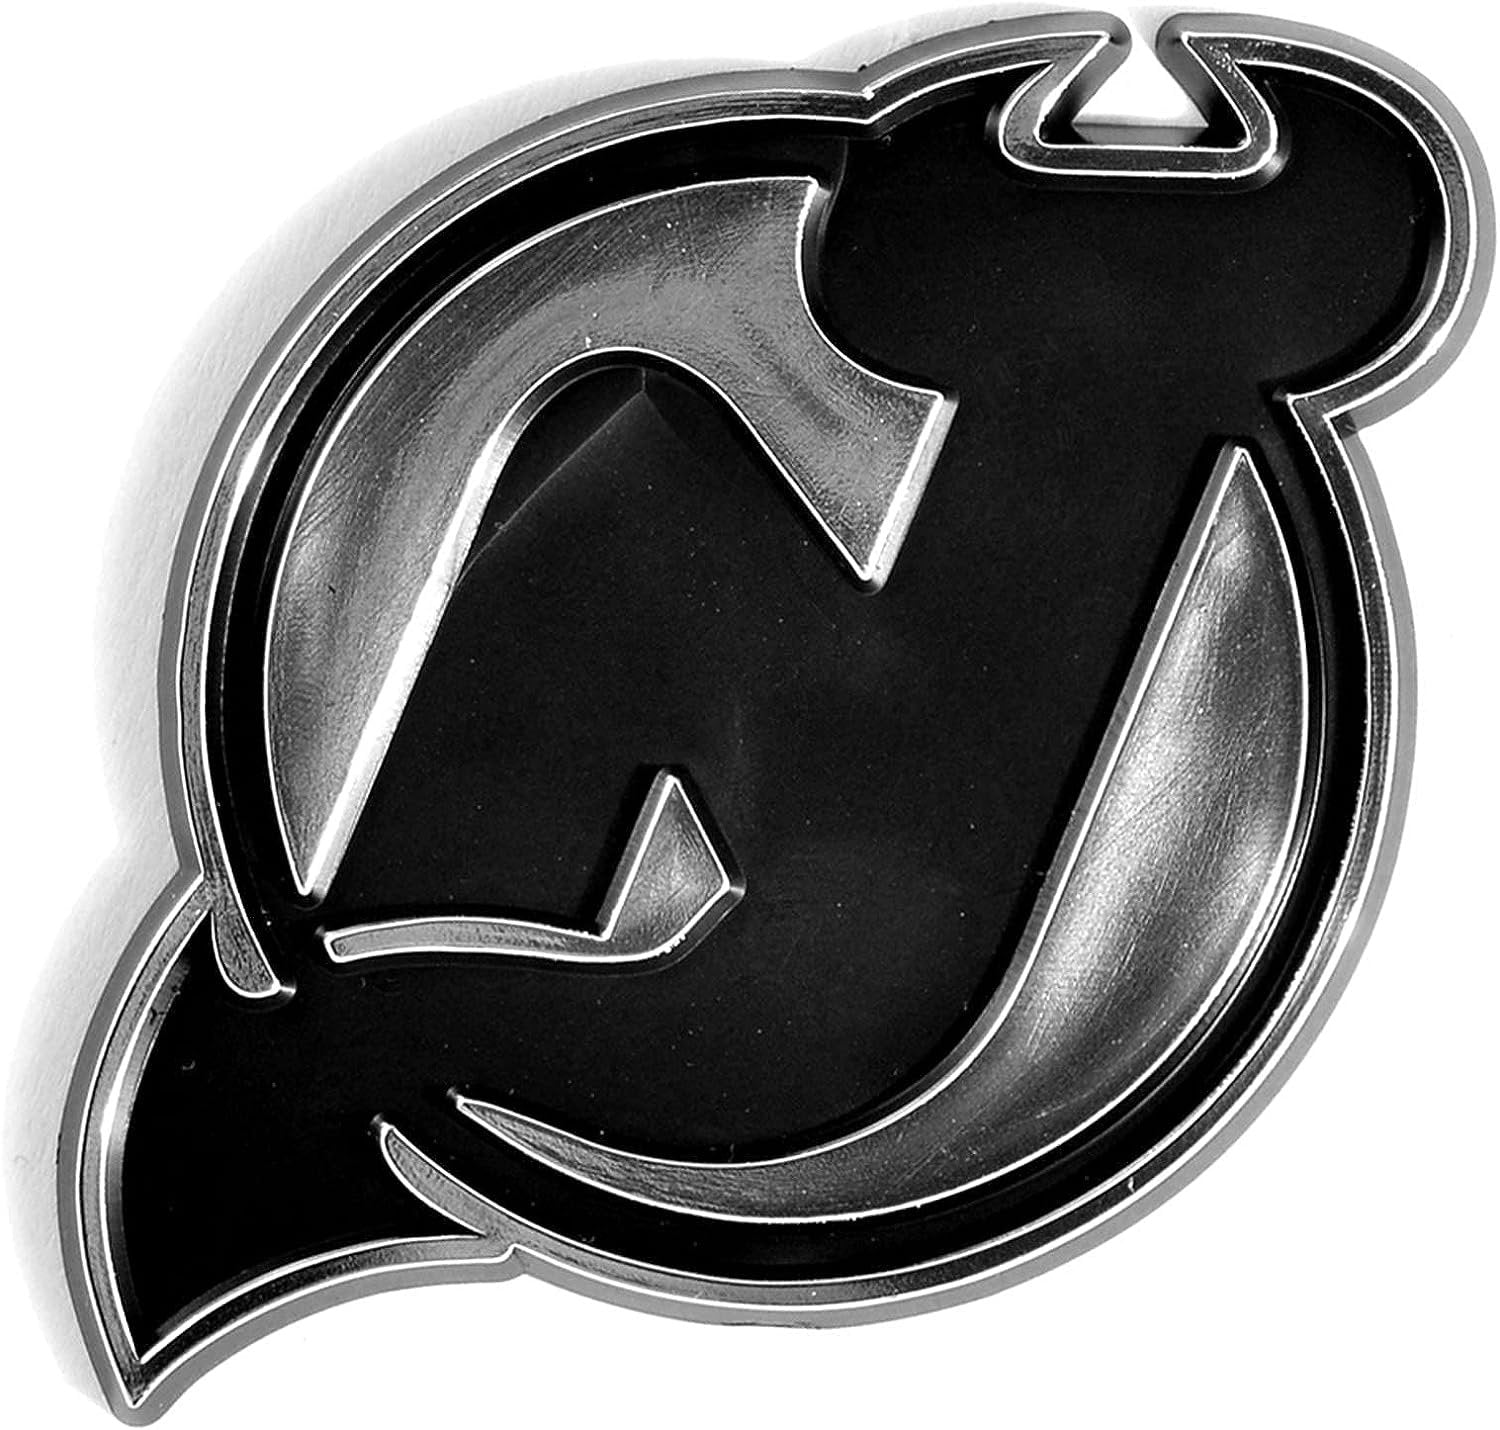 New Jersey Devils Auto Emblem, Silver Chrome Color, Molded, Raised, Adhesive Tape Backing, 3 Inch